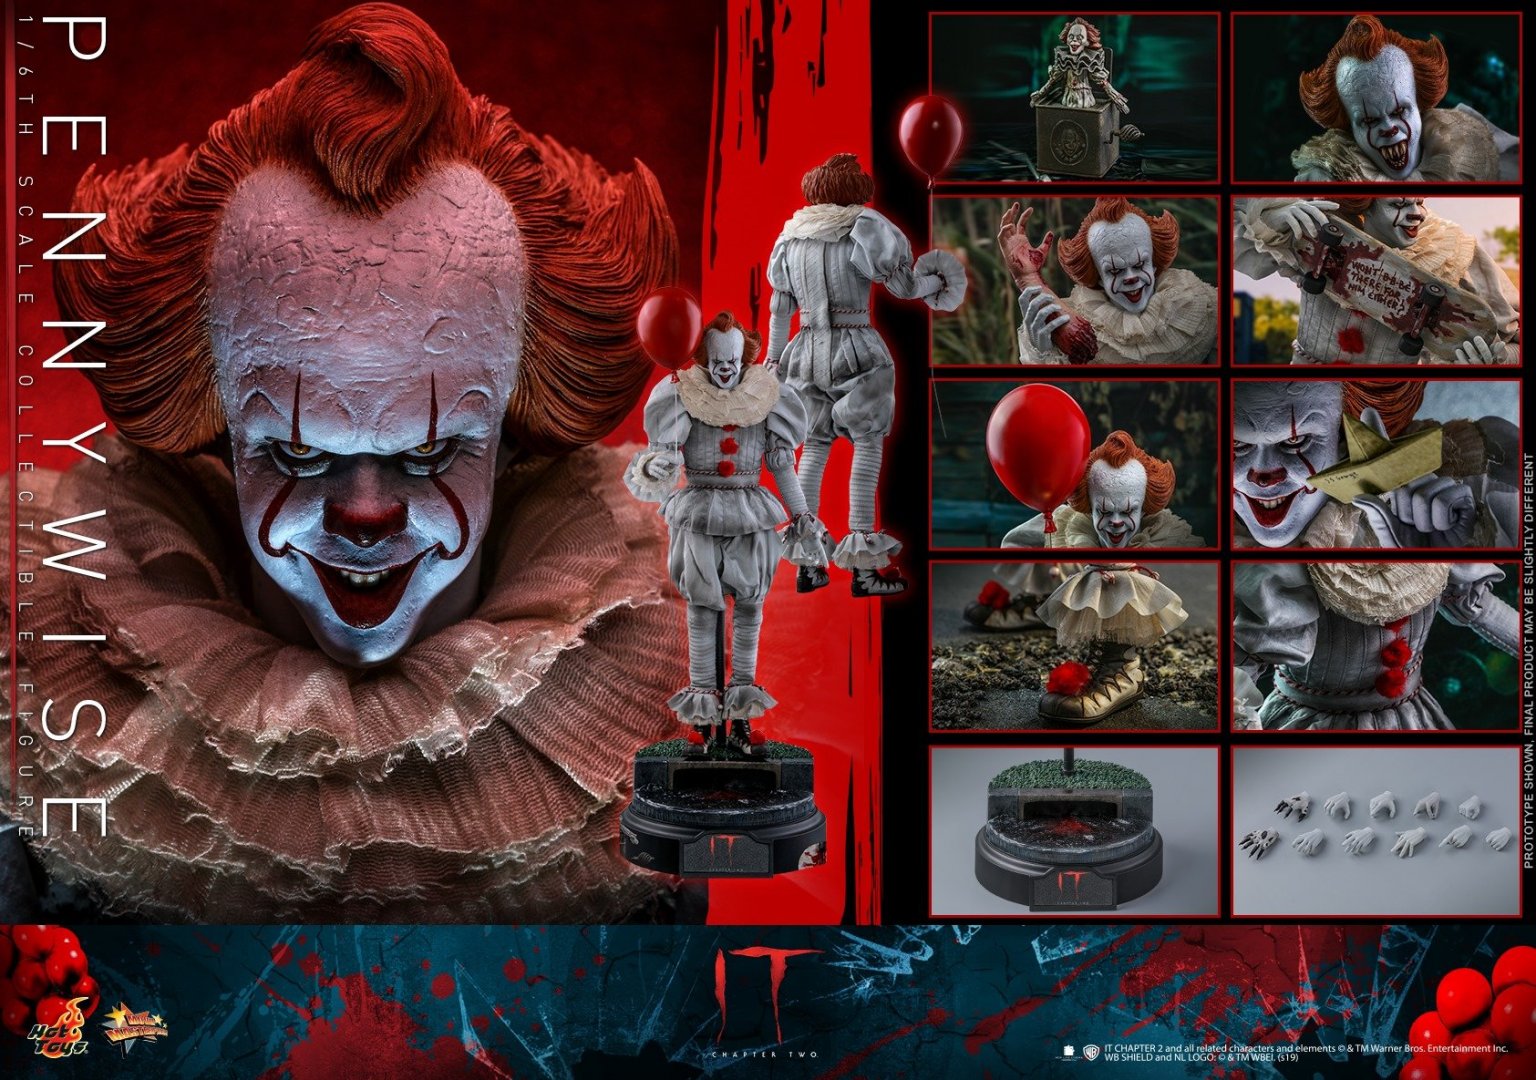 Hot-Toys-Pennywise-019.jpg